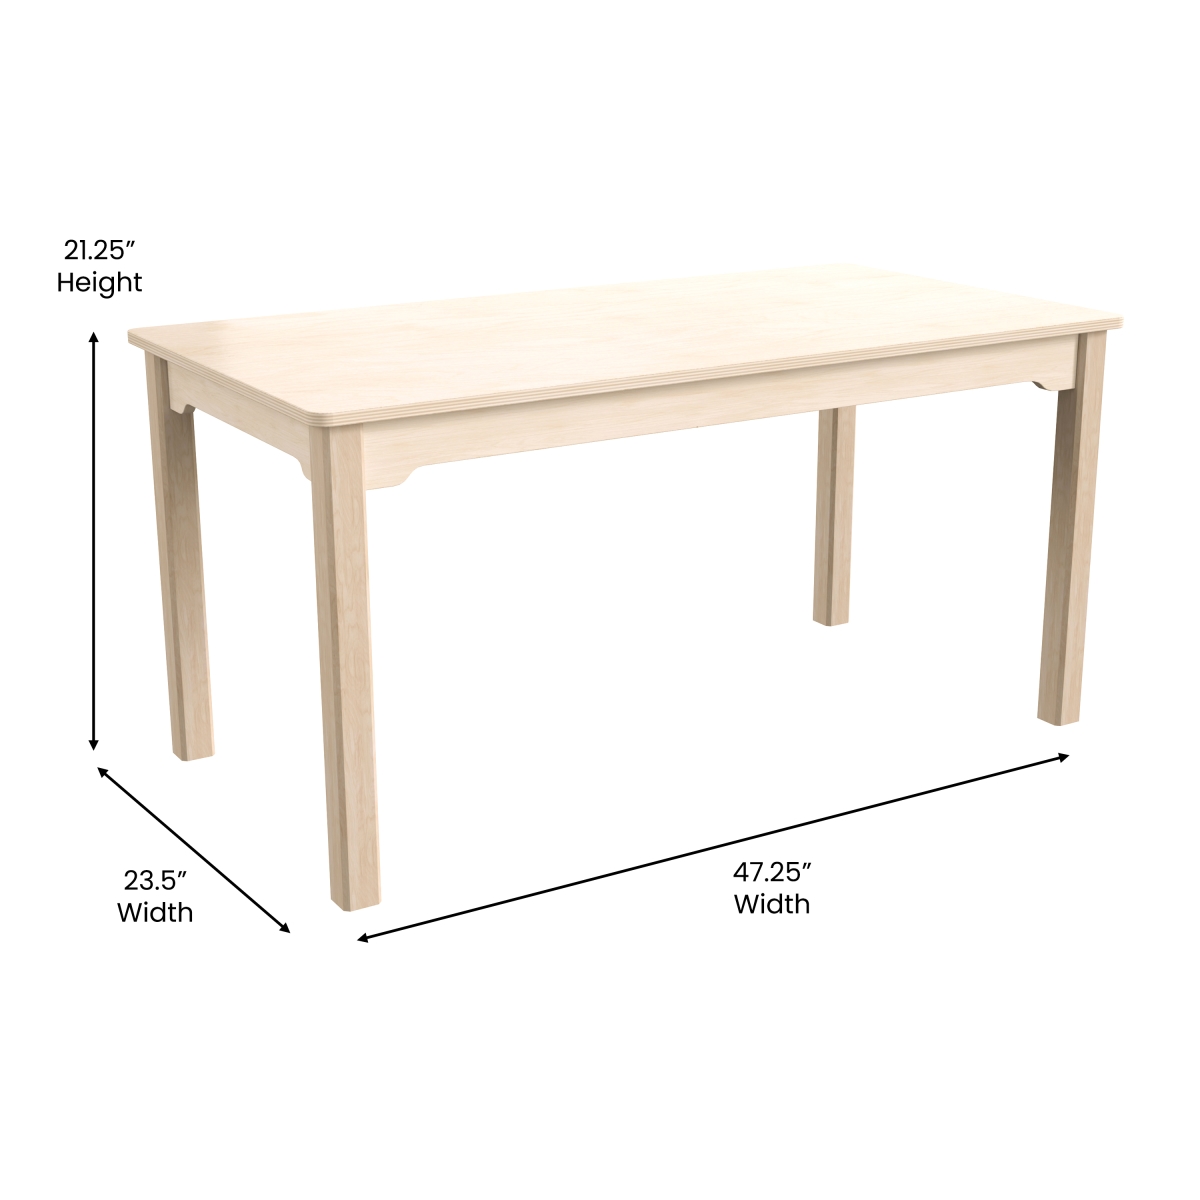 Picture of Flash Furniture MK-ME088012-GG 23.5 x 47.25 x 21.25 in. Bright Beginnings Commercial Grade Wooden Rectangular Preschool Classroom Activity Table, Beech